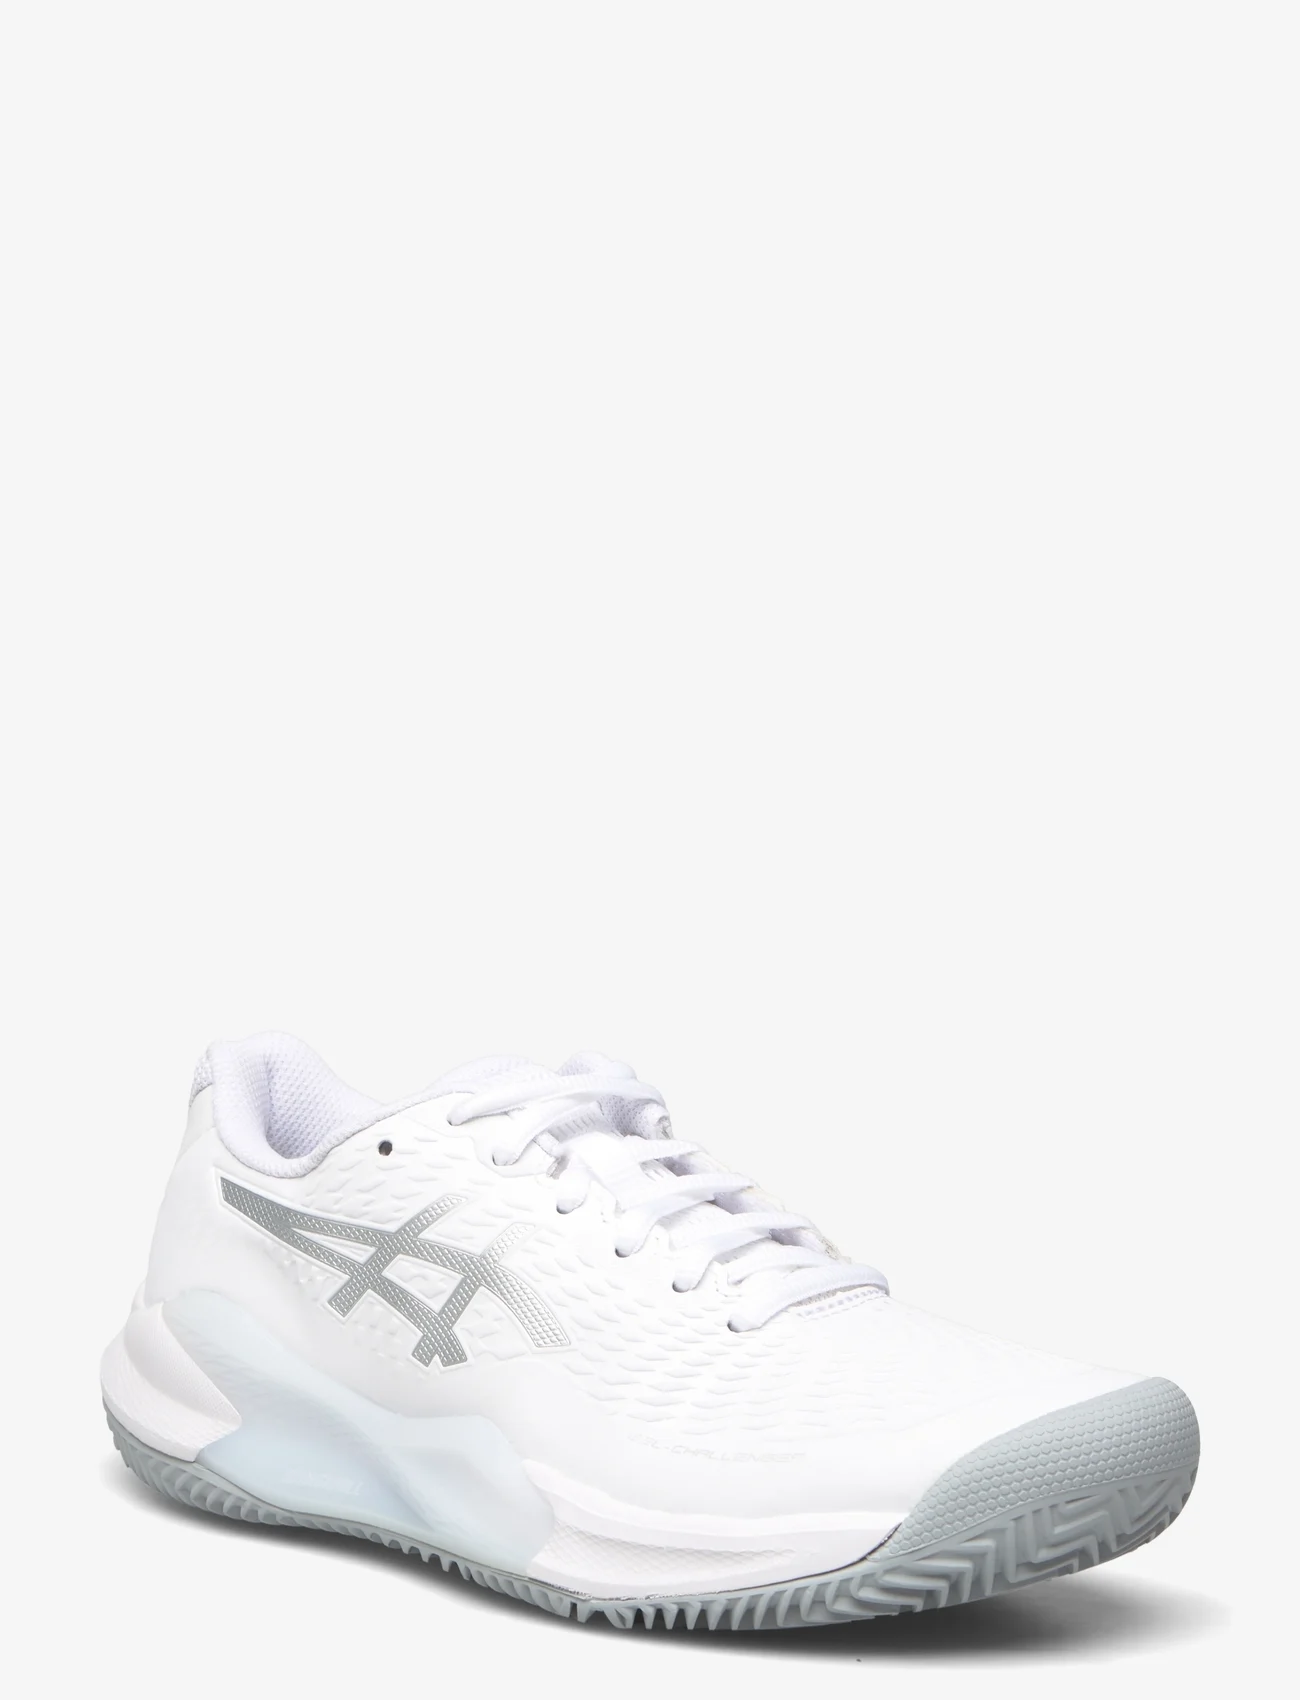 Asics - GEL-CHALLENGER 14 CLAY - racketsports shoes - white/pure silver - 0